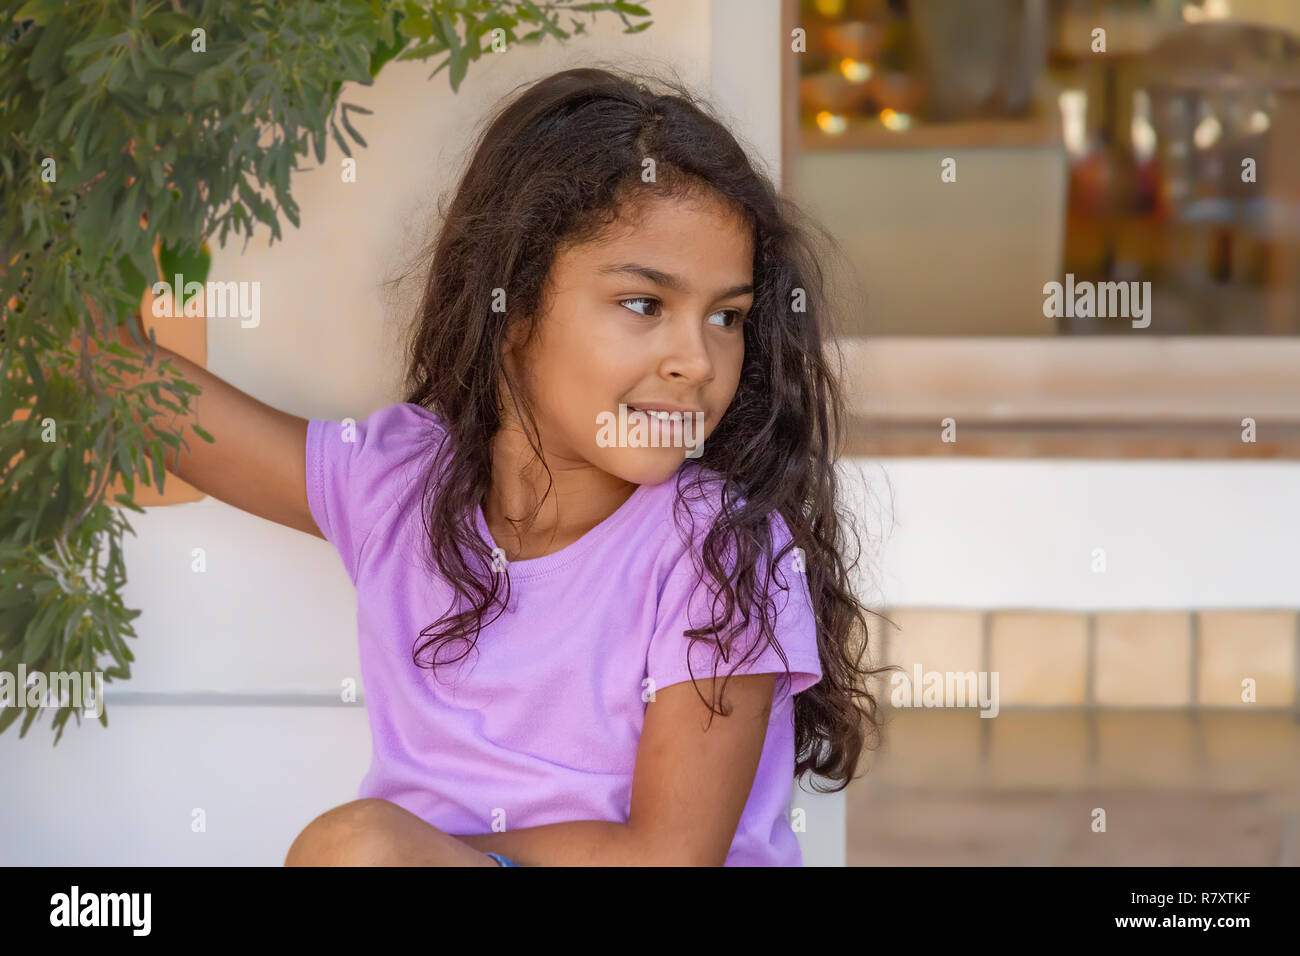 Beautiful little girl holds on to a branch while leaning on a wall looking away. Wearing a solid color light purple shirt with shabby chic messy hair. Stock Photo